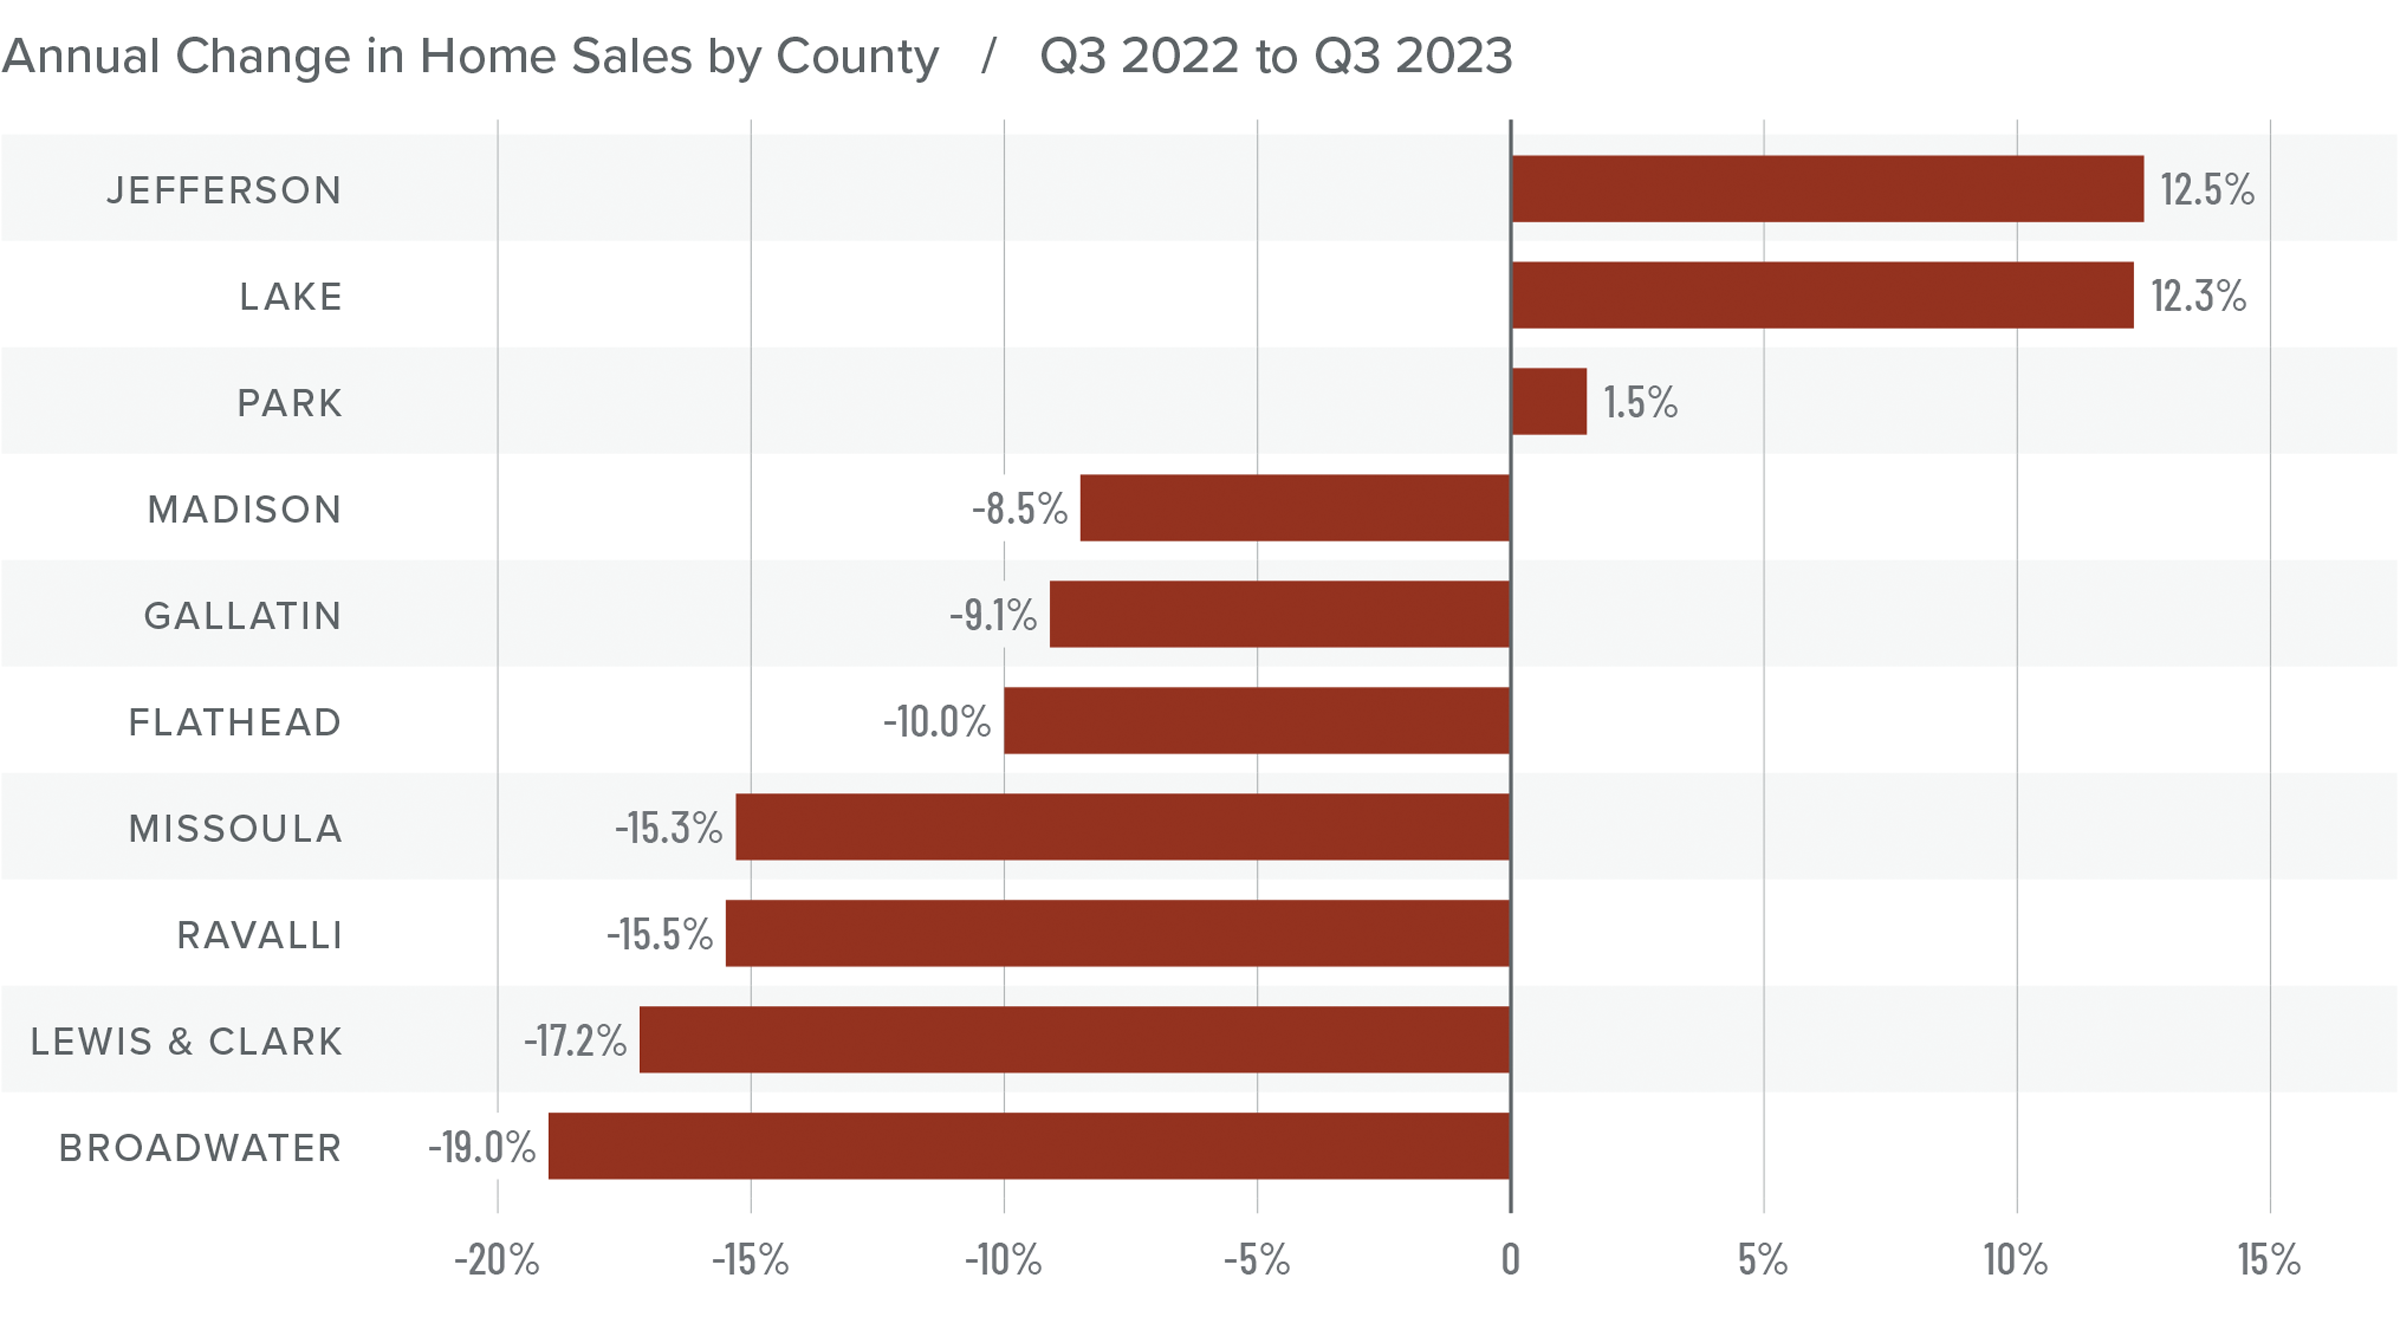 A bar graph showing the annual change in home sales by county in Montana from Q3 2022 to Q3 2023. Park County had the least change at 1.5% increase, Jefferson County and Lake County had the largest increases of 12.5% and 12.3% respectively while the rest of the counties had a decrease and Broadwater had the largest decrease at 19 percent.